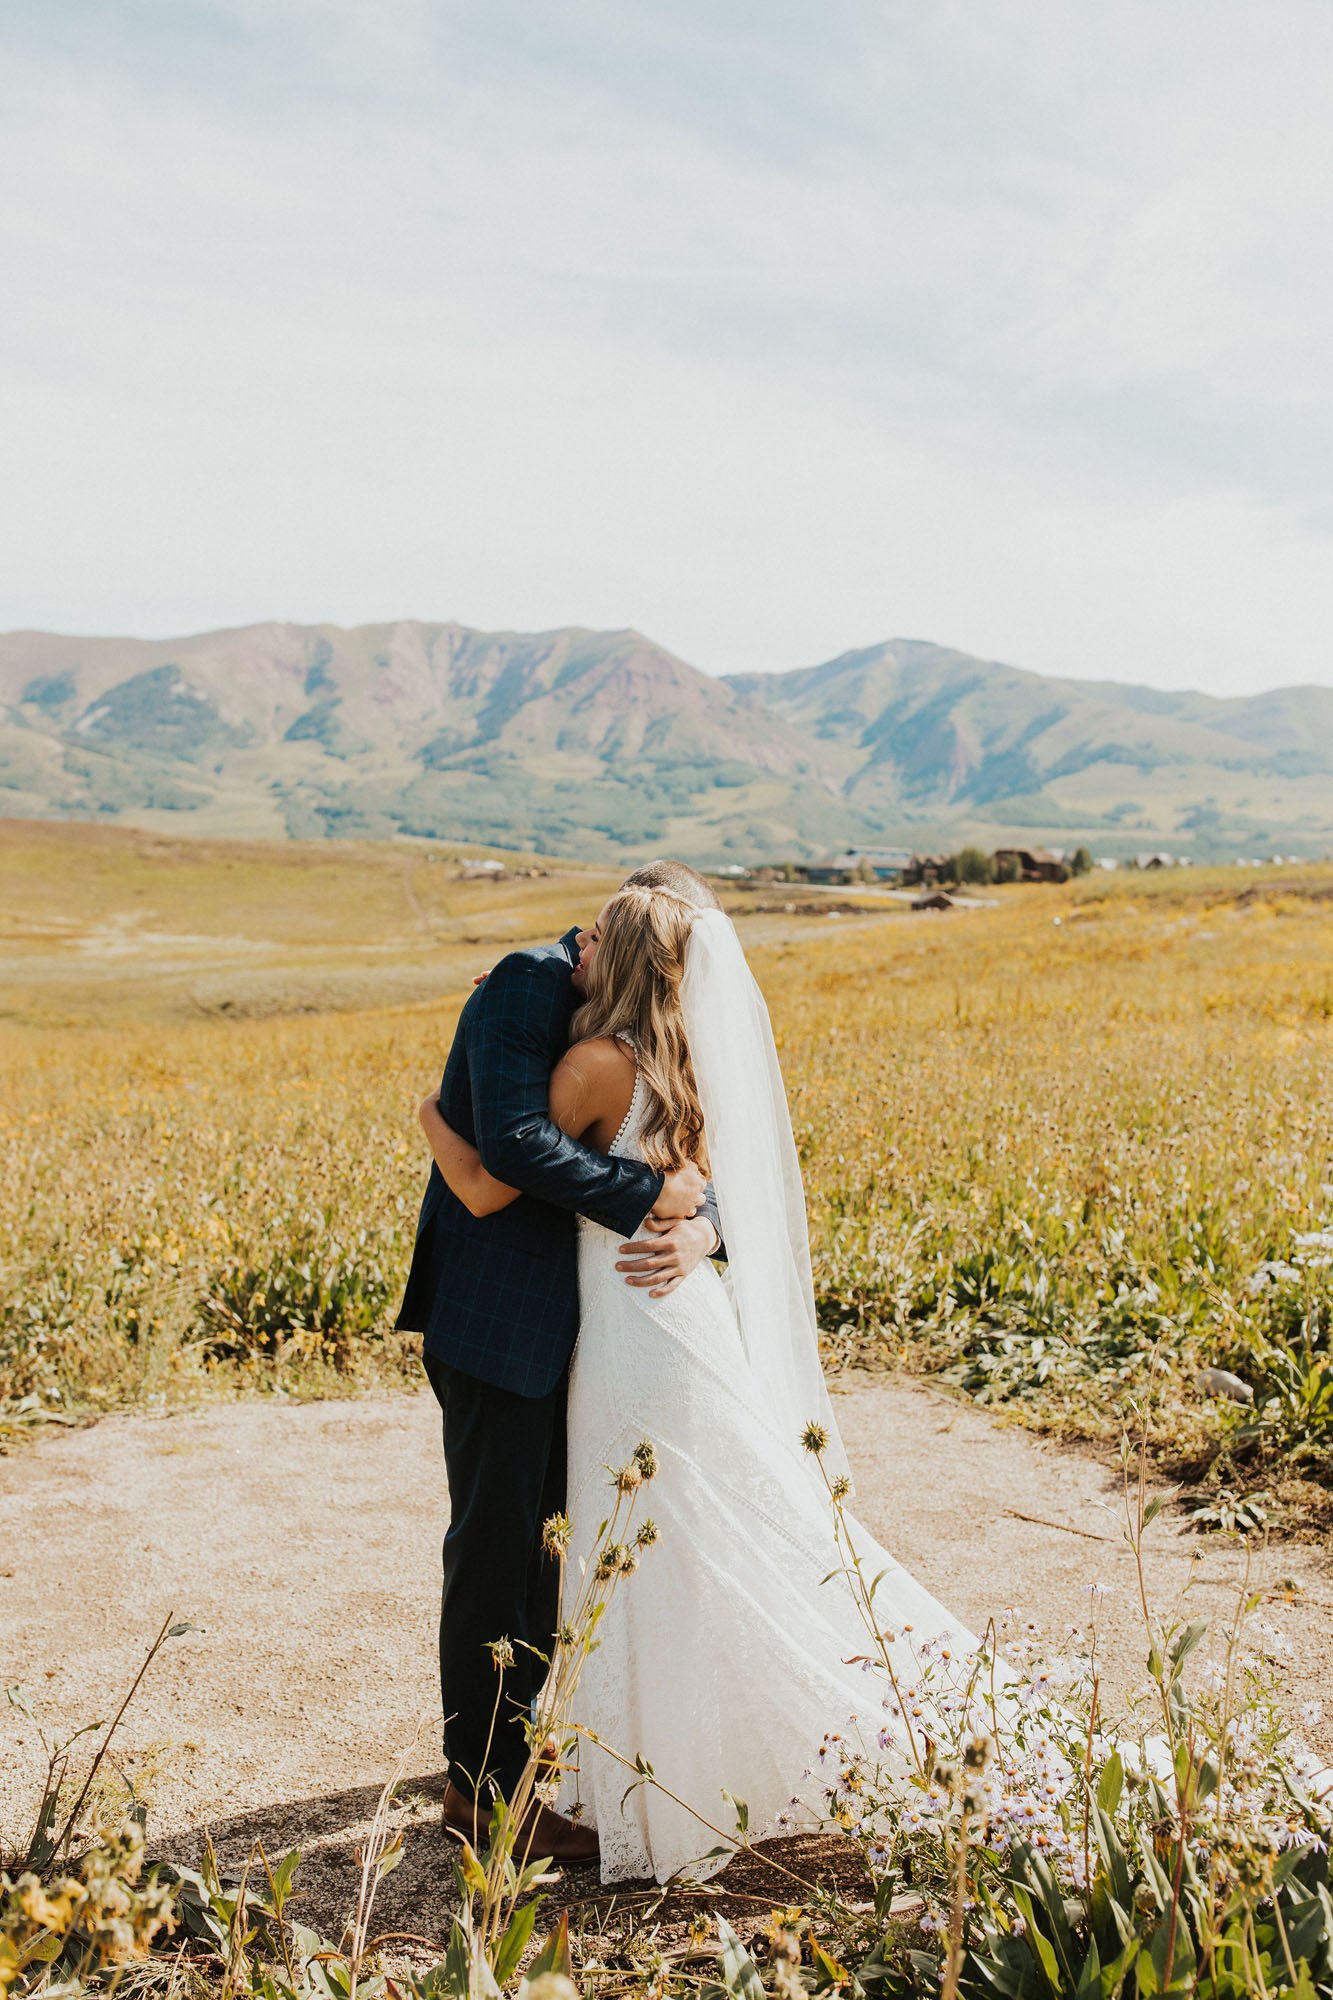  Photograph of a bride wearing Rish Rio Wedding dress and hugging the groom as they have their first look in a field of wildflowers on a sunny day in Crested Butte, Colorado. They are embracing with their hands around each other’s waist, with the bri